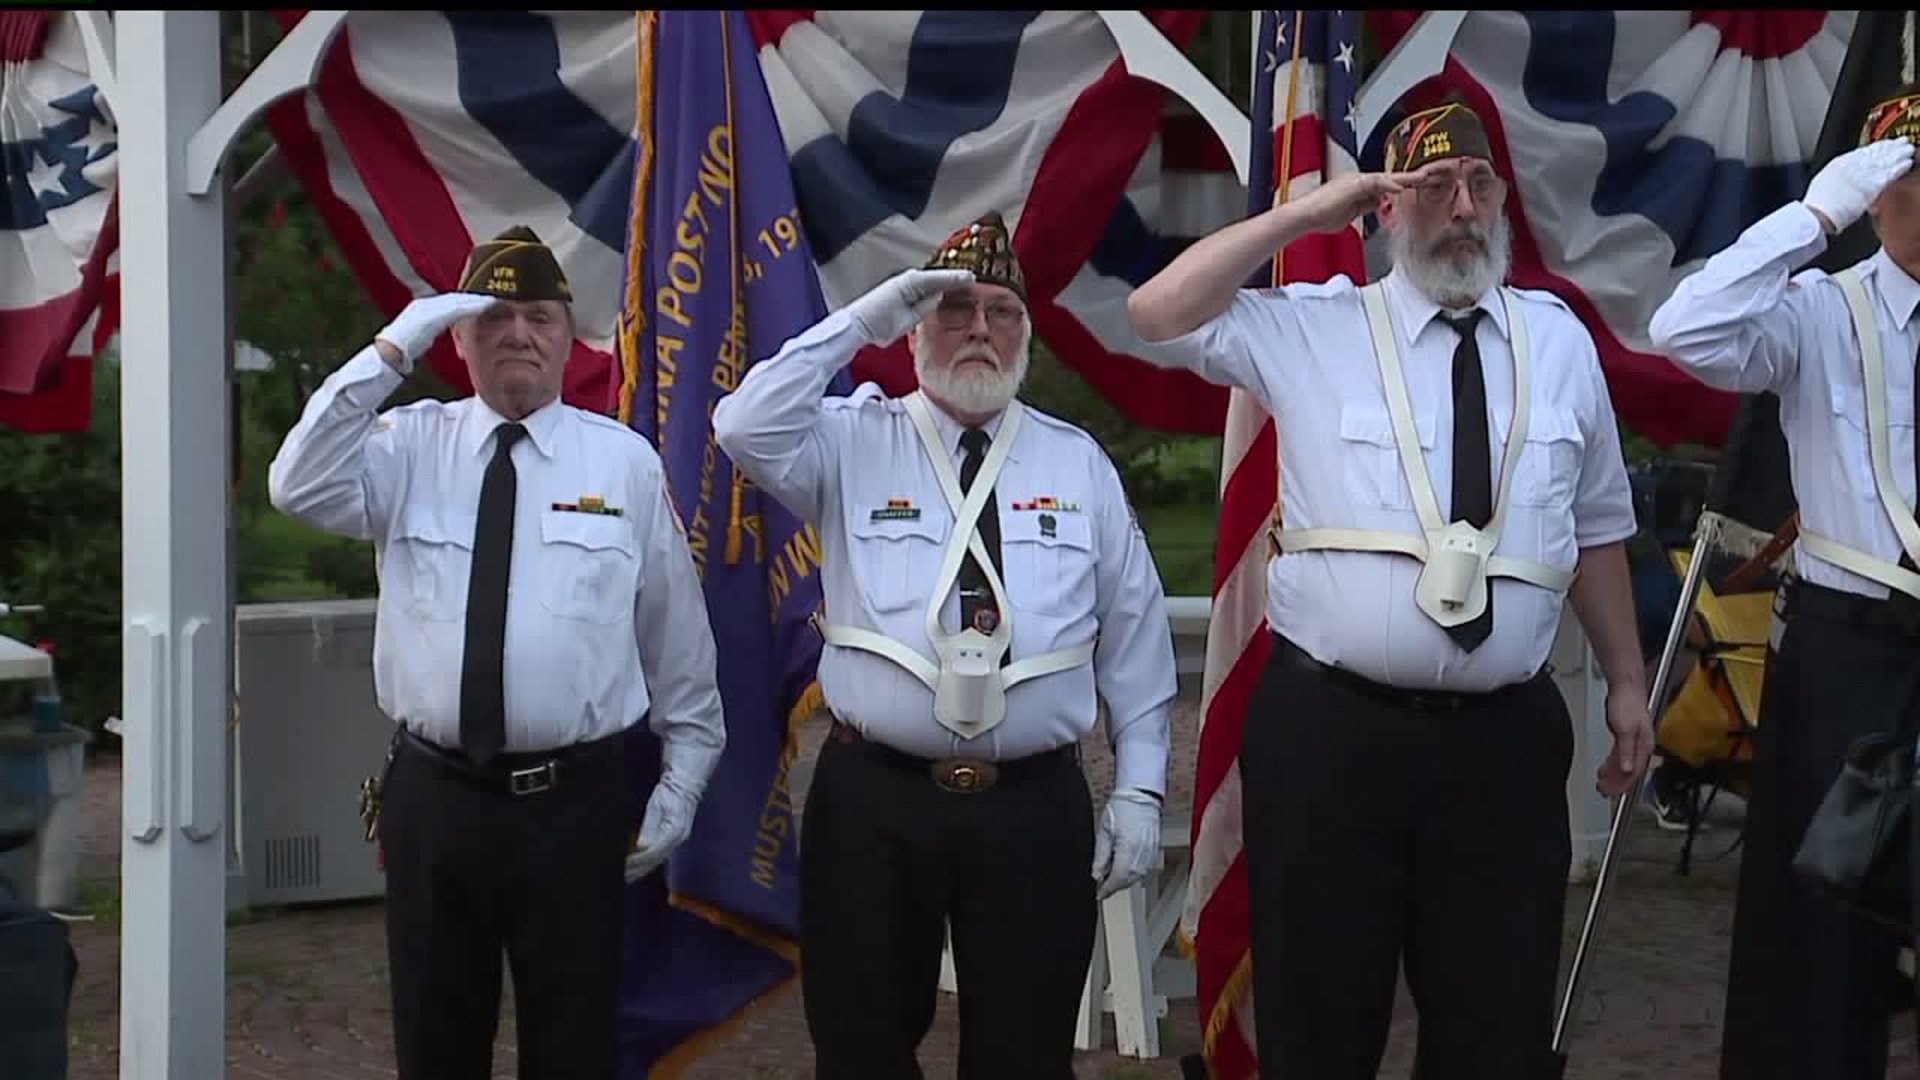 Manchester Borough holds 9/11 remembrance